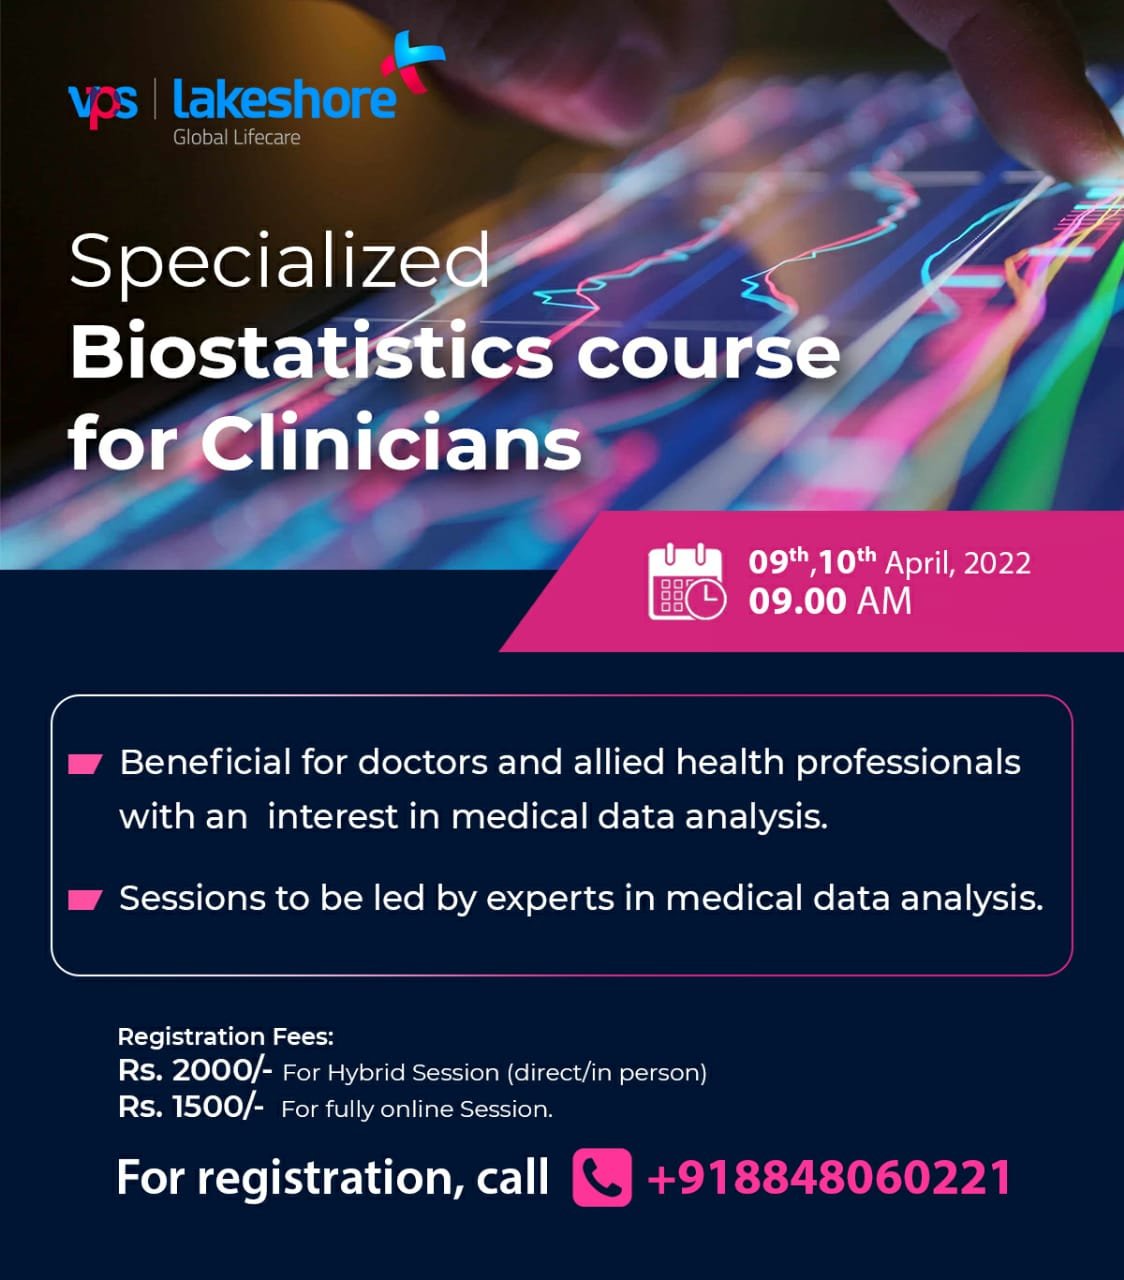 VPS Lakeshore is offering a specialized Biostatistics course for Clinicians